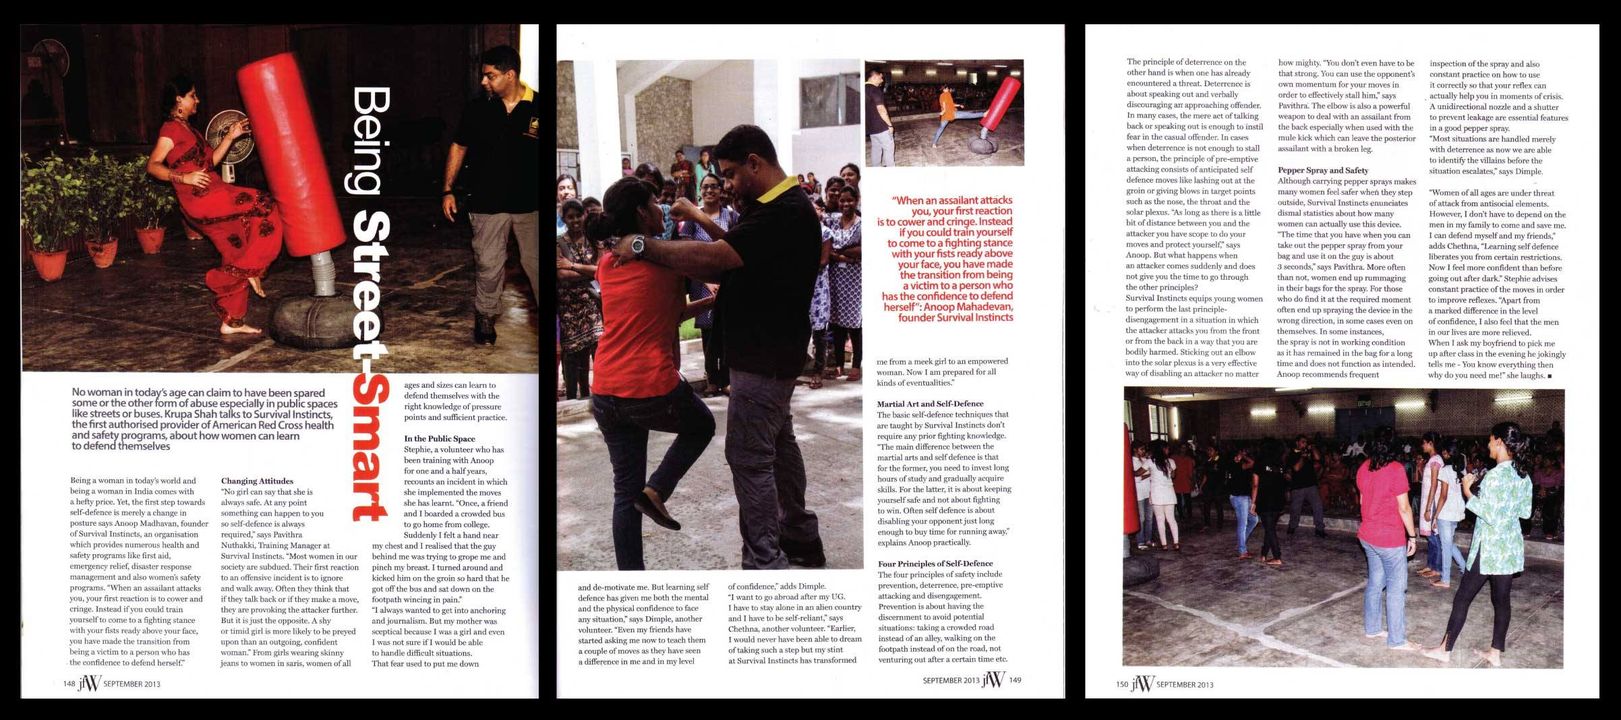 Just For Women recently featured a three page article about Survival Instincts Company's self defense program. This comprehensive course teaches women the basics of defending themselves in any situation, including physical and verbal techniques to de escalate conflict before it starts. Participants also learn how to identify potential danger signs with strangers or acquaintances as well as safety tips for when out alone at night. The instructors are highly experienced professionals who provide an encouraging learning environment that is both empowering and fun! With this knowledge, participants can walk away feeling confident they will be able to protect themselves if ever needed.